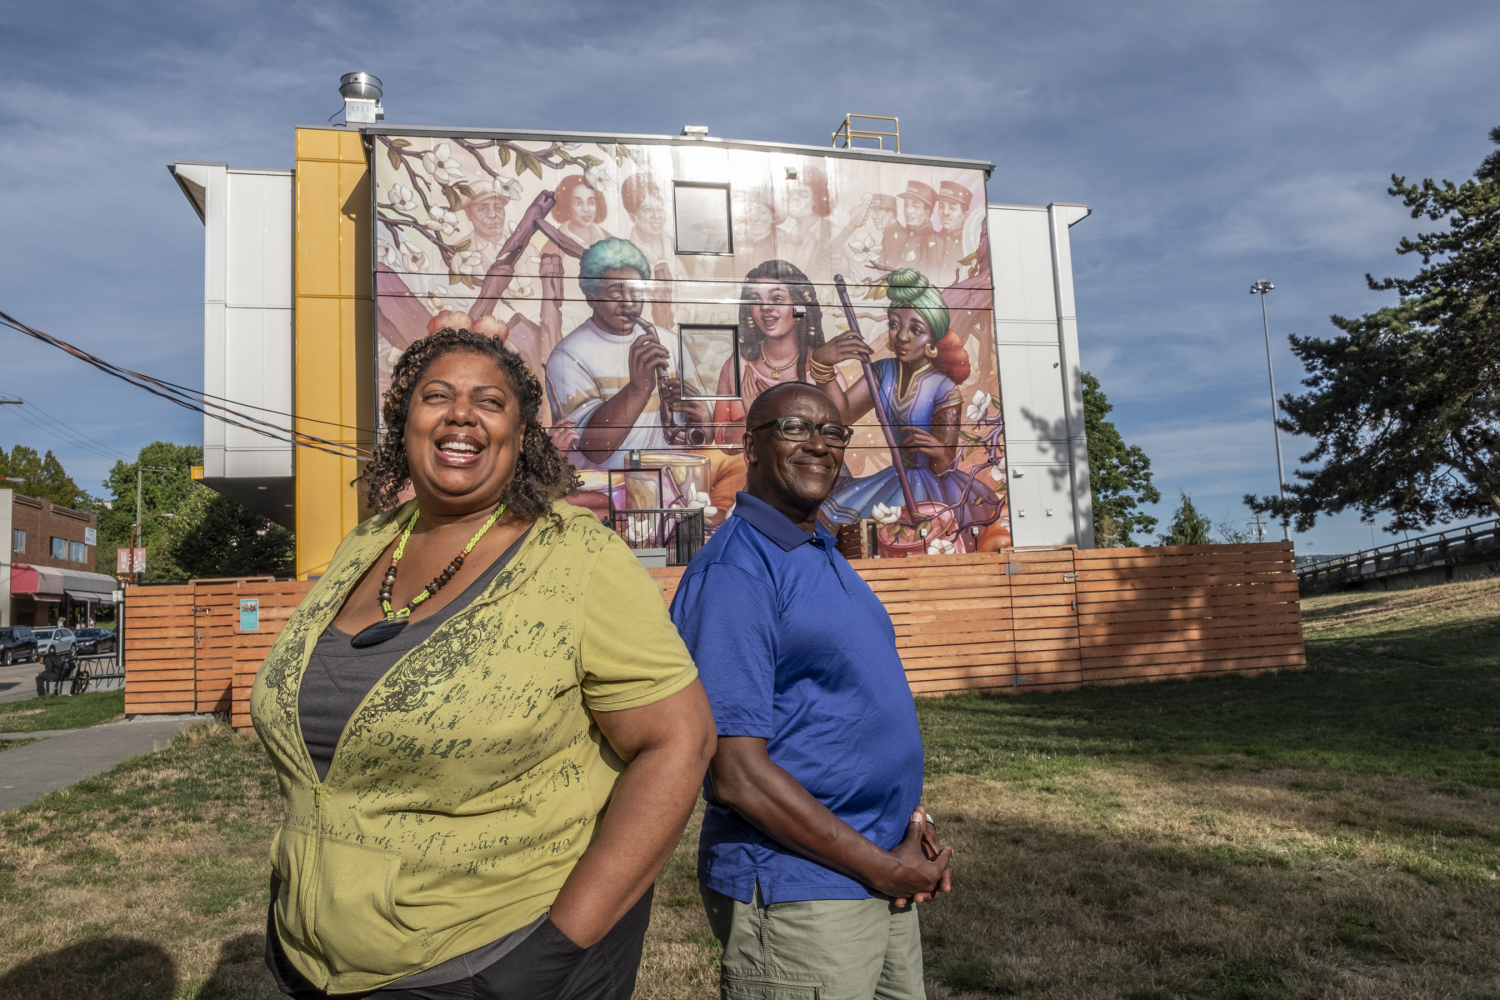 A smiling Black couple standing in a grassy area with a mural of black artists and musicians on a building behind them